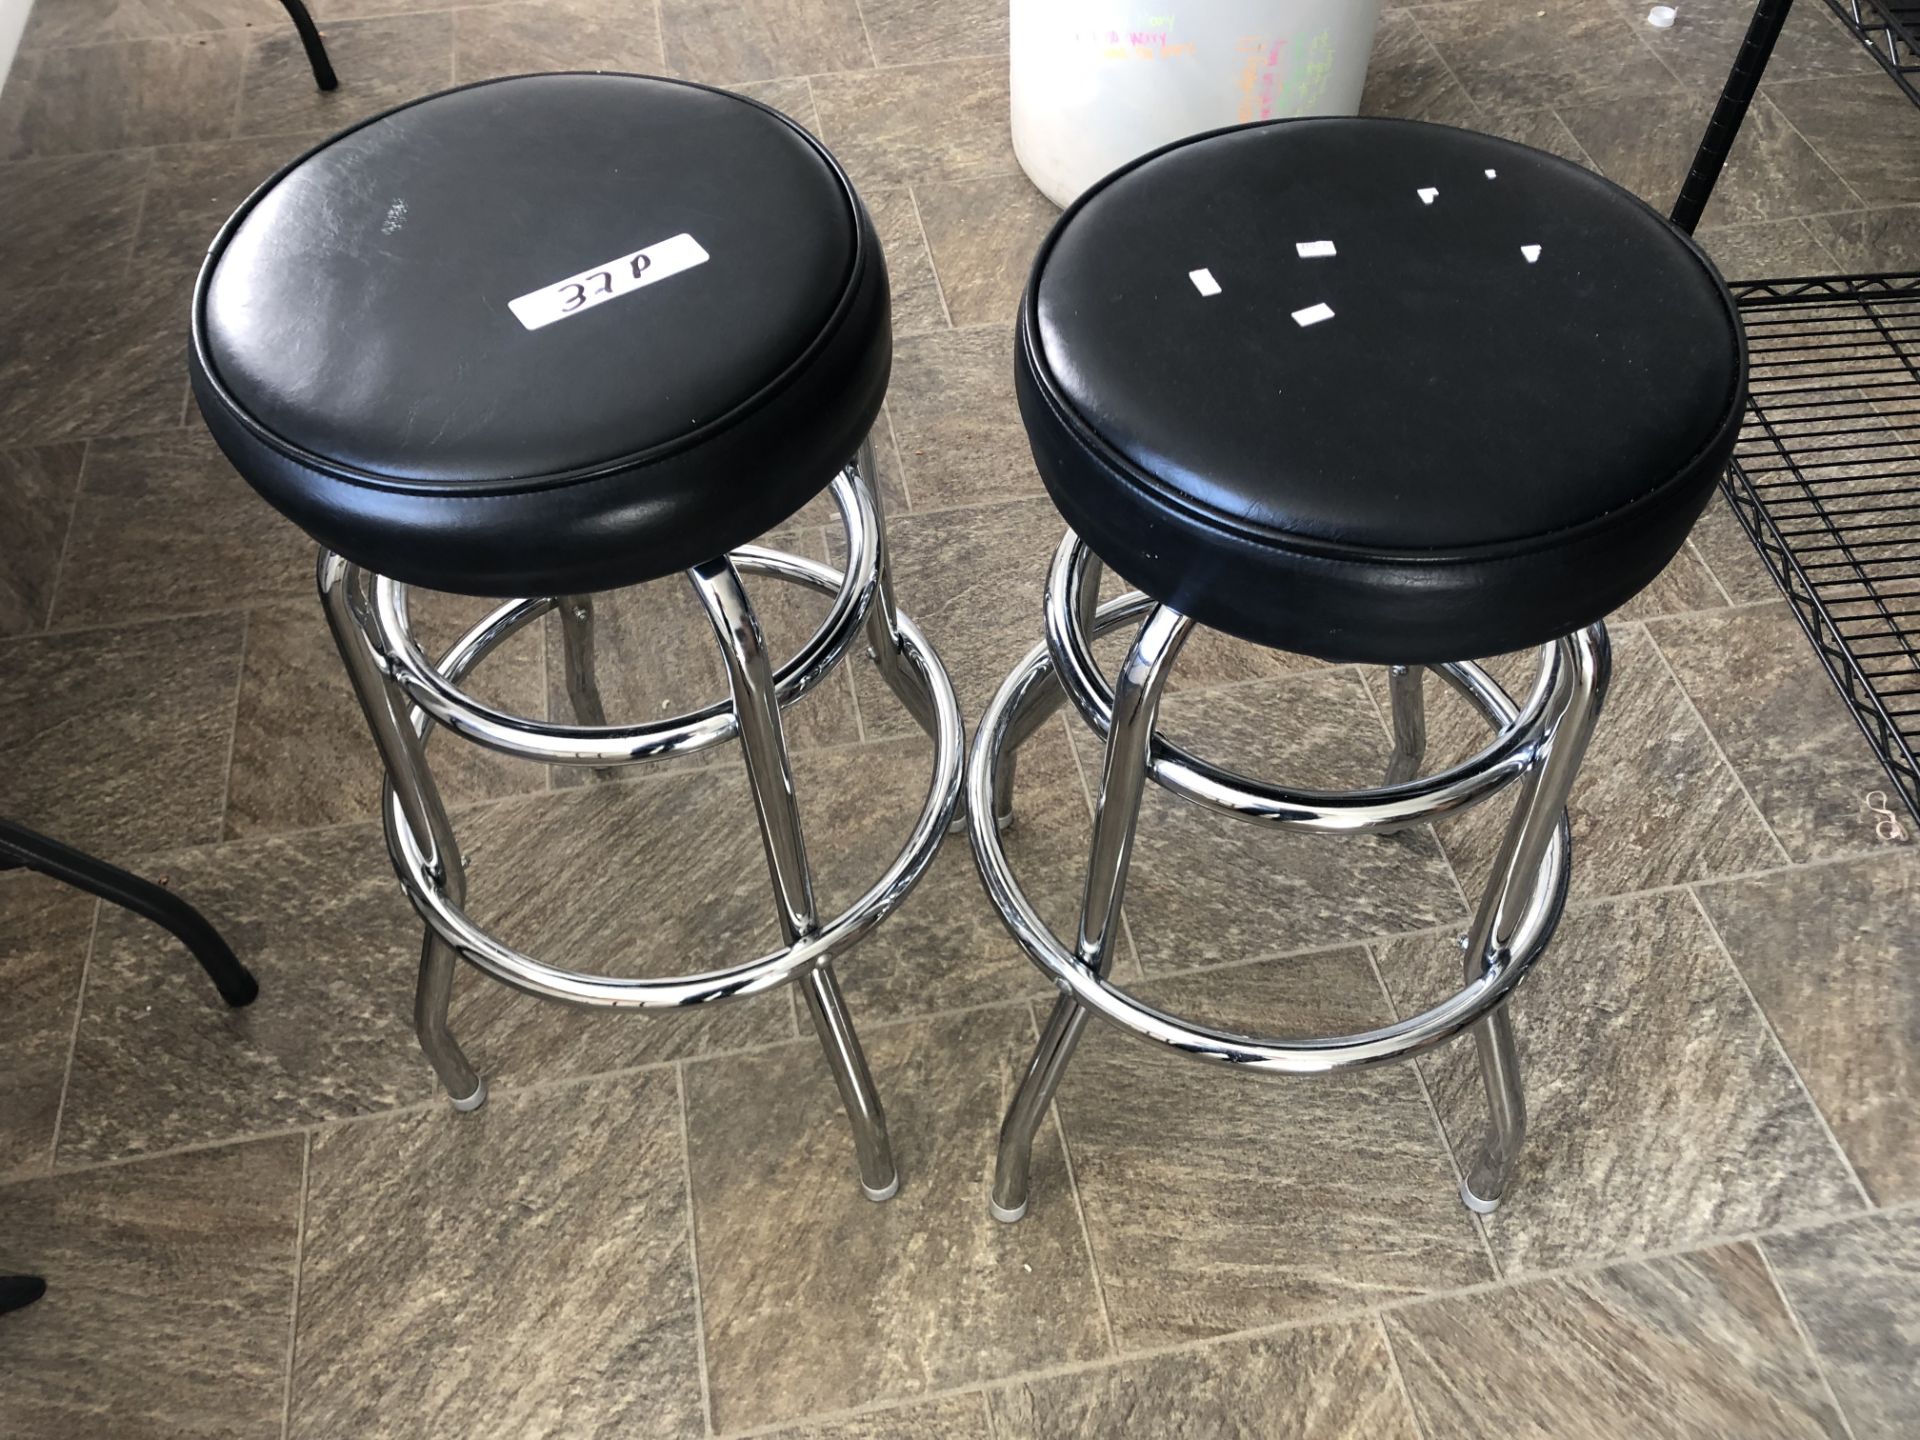 Pair of bar stools 2 for one money